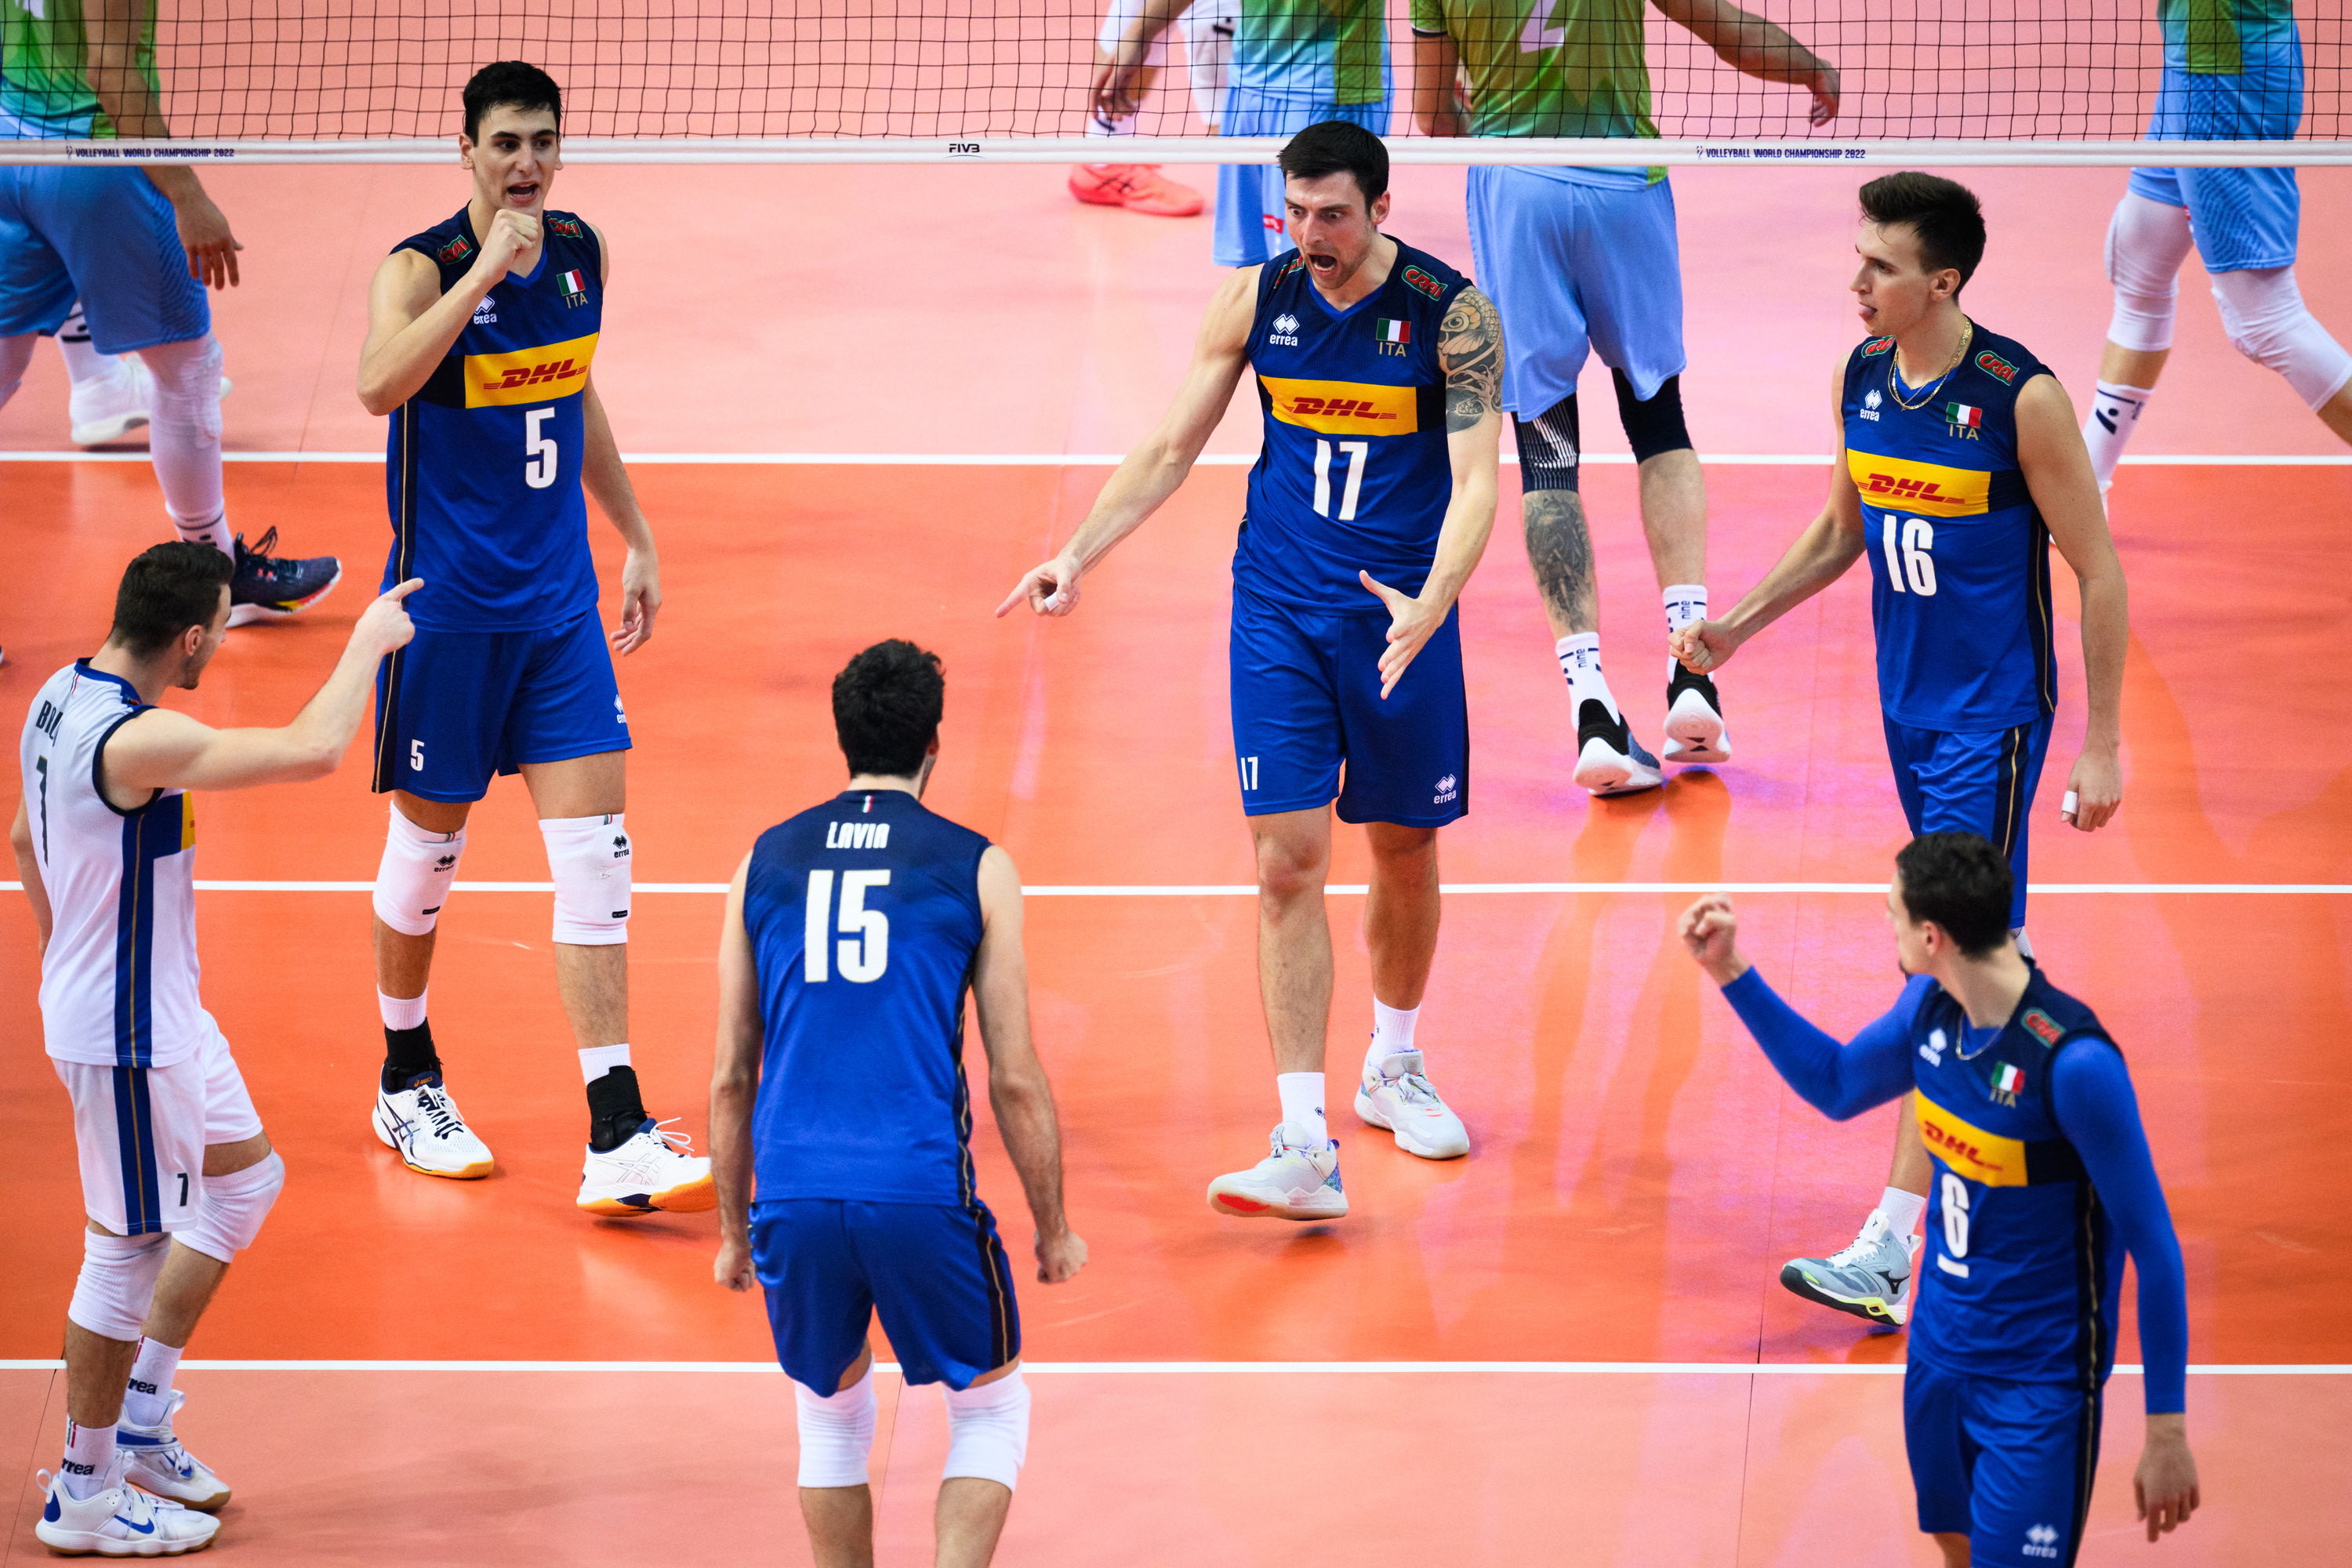 Italy dominate Slovenia on their way to the final volleyballworld